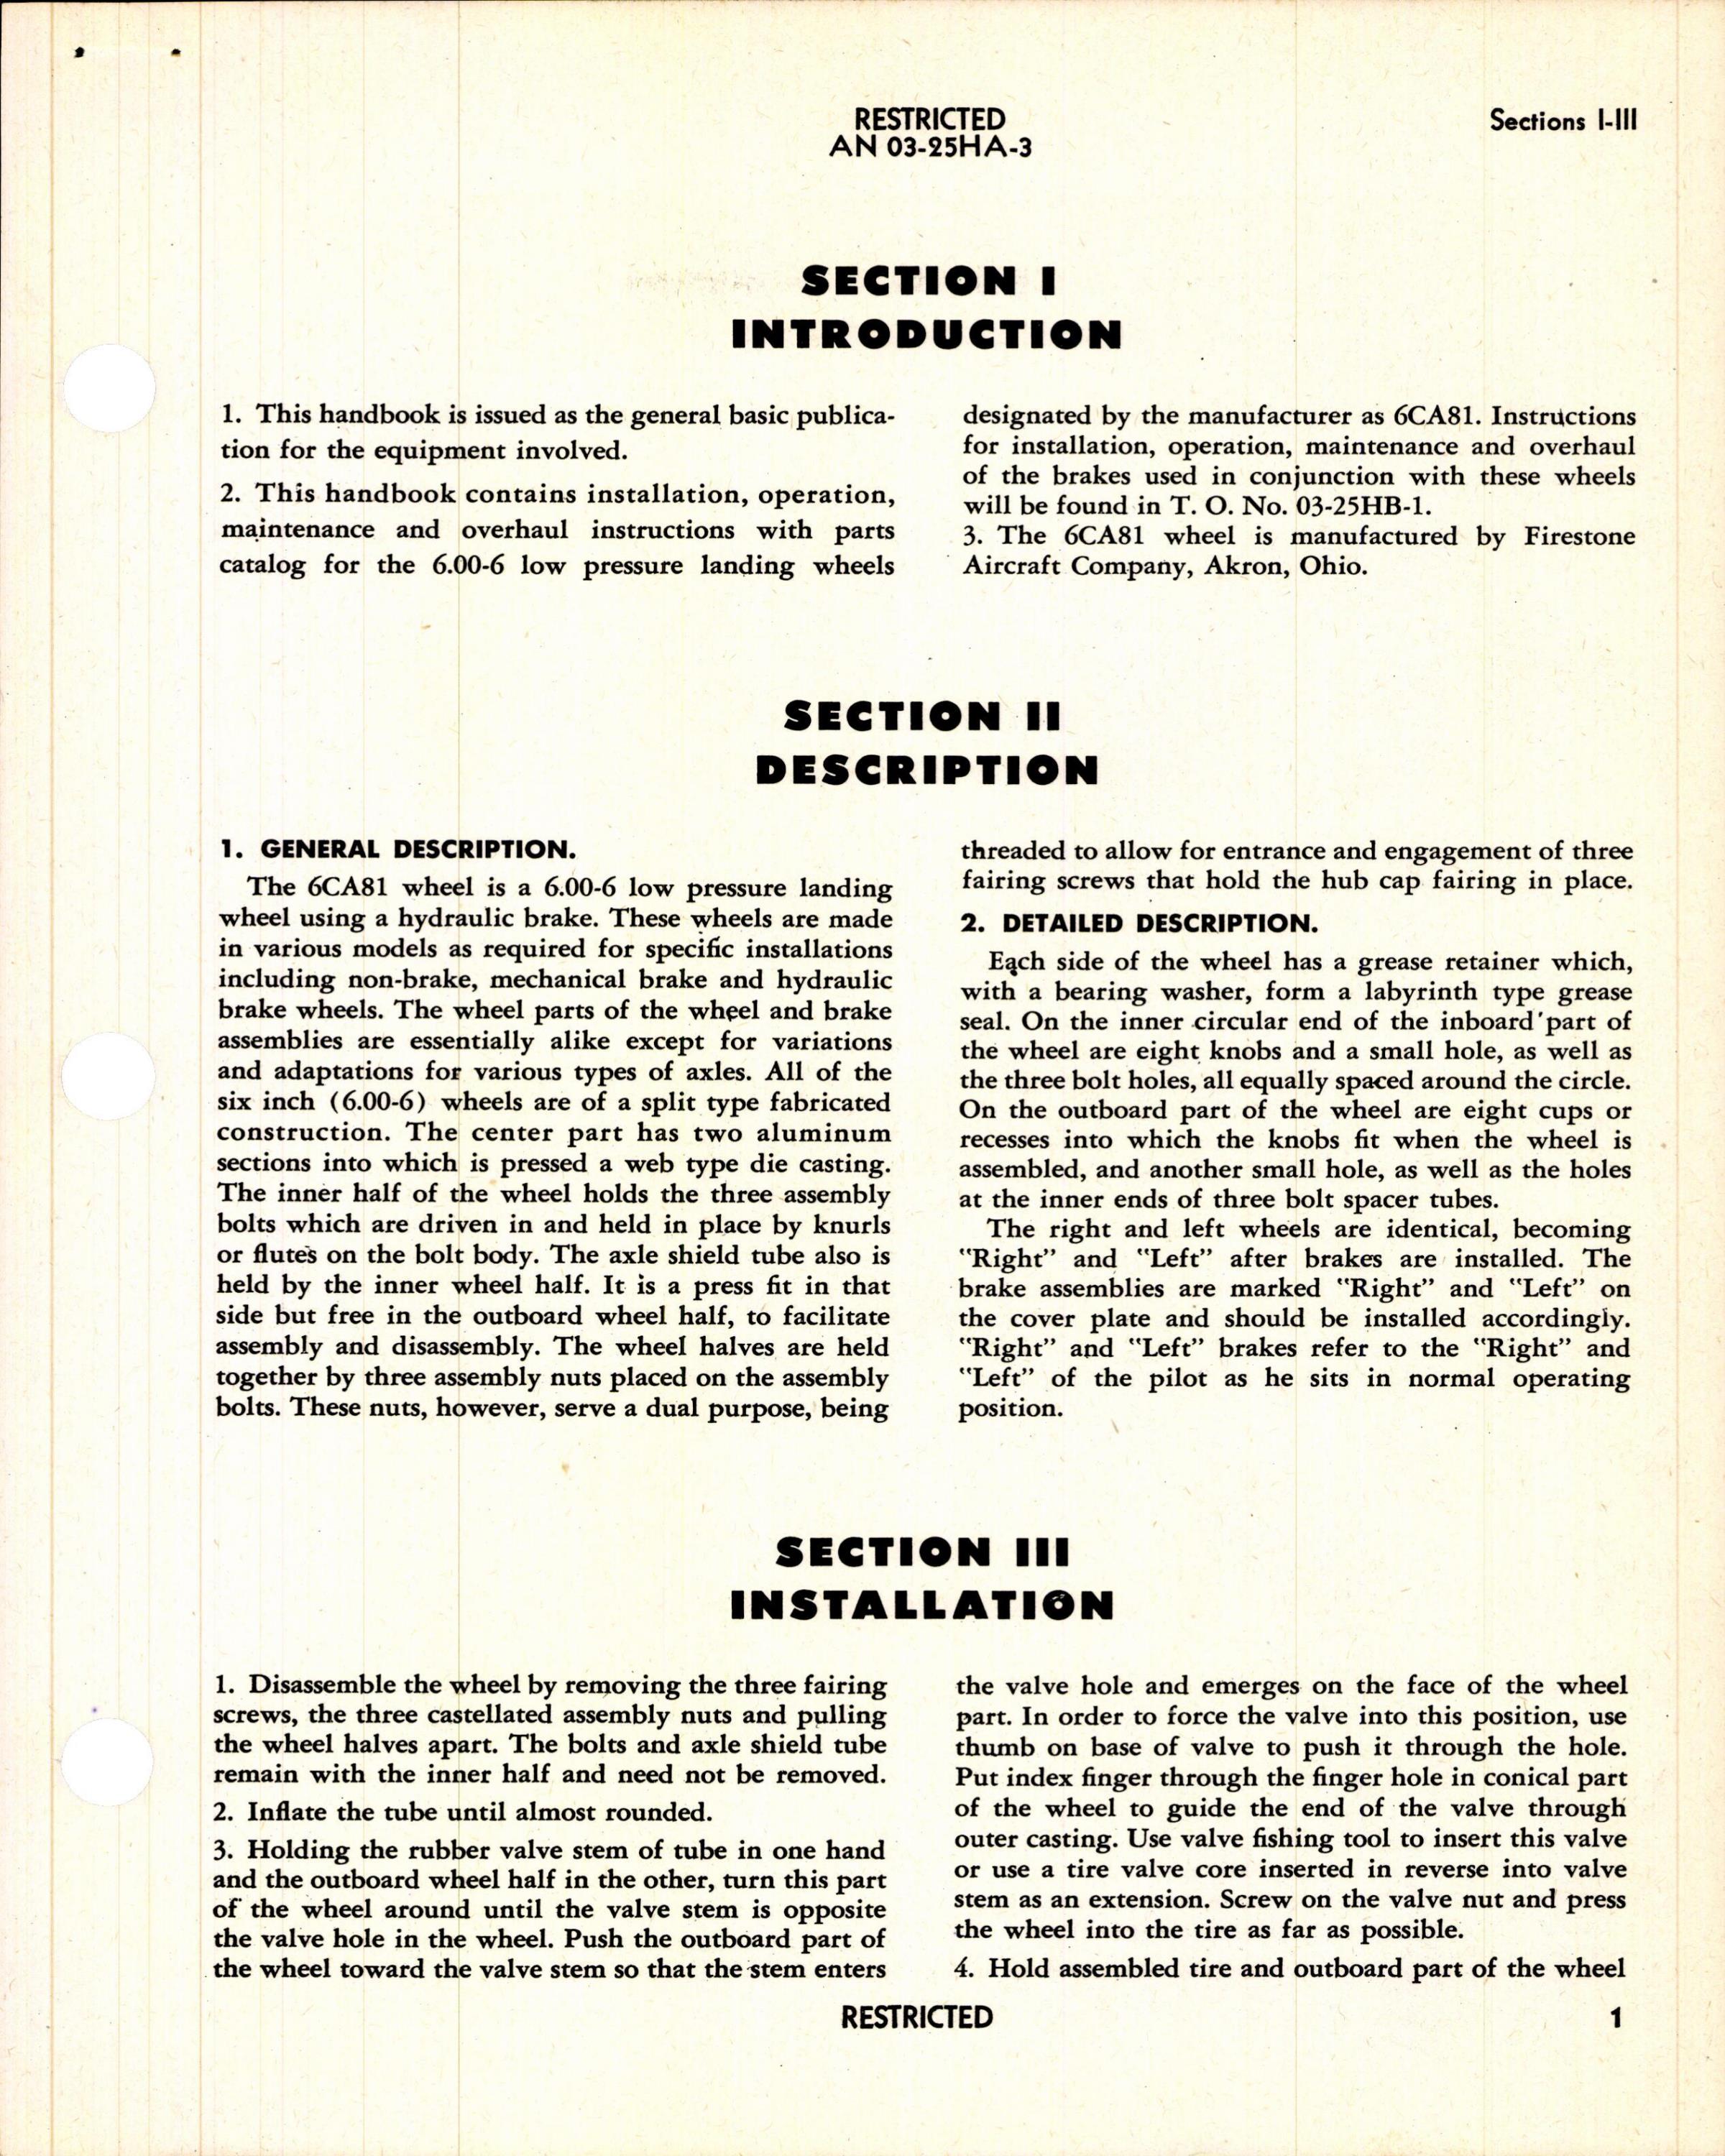 Sample page 5 from AirCorps Library document: Handbook of Instructions with Parts Catalog for Low Pressure Landing Wheels